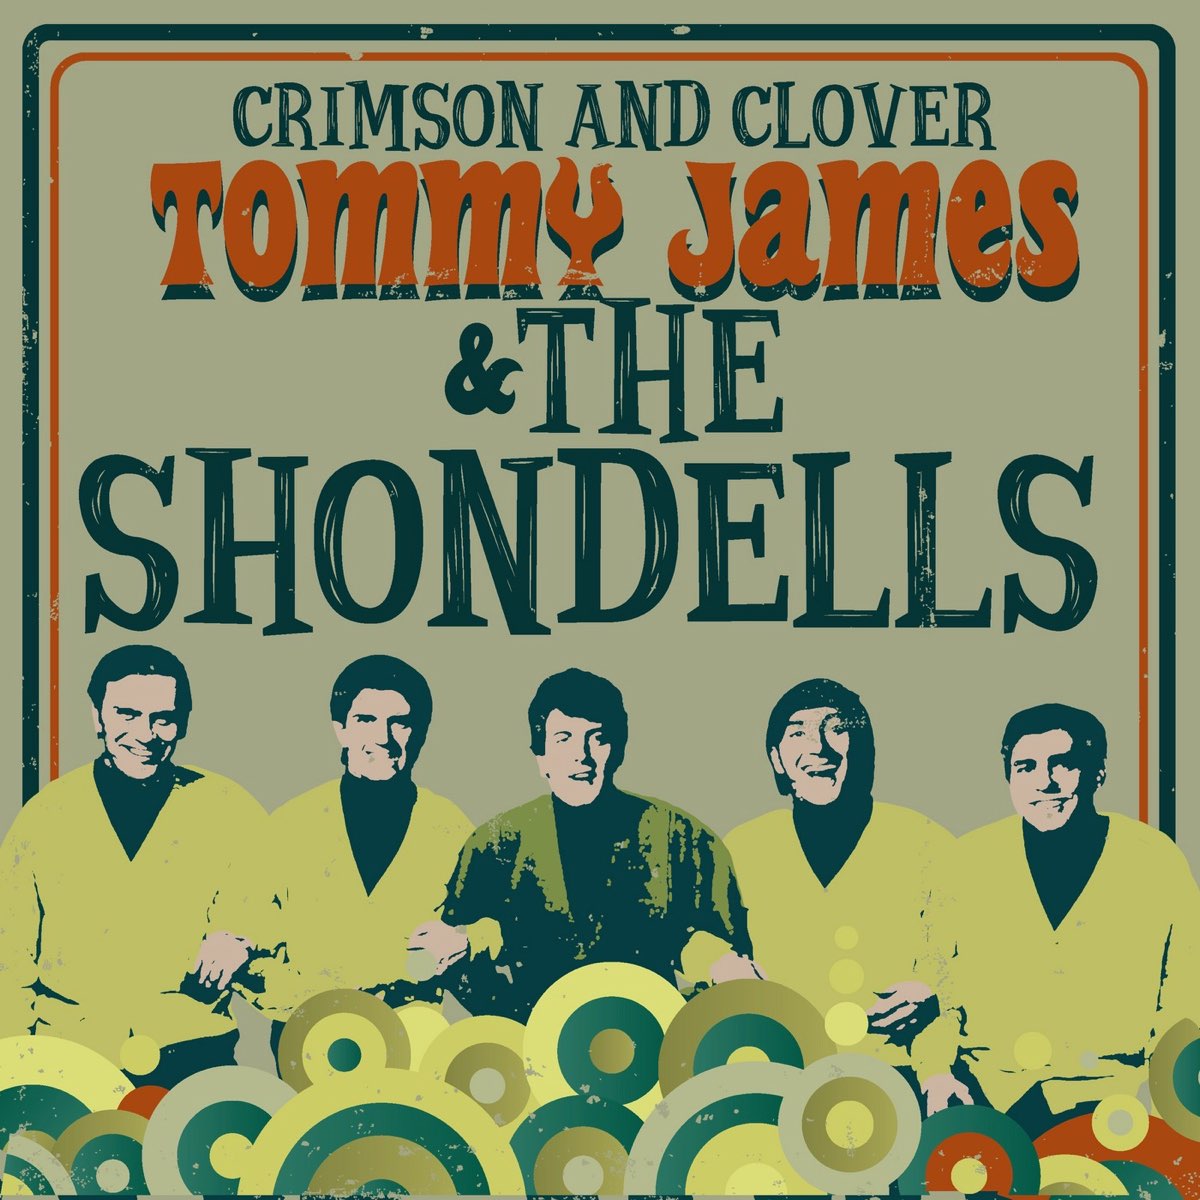 Crimson and Clover - Album by Tommy James & The Shondells - Apple Music